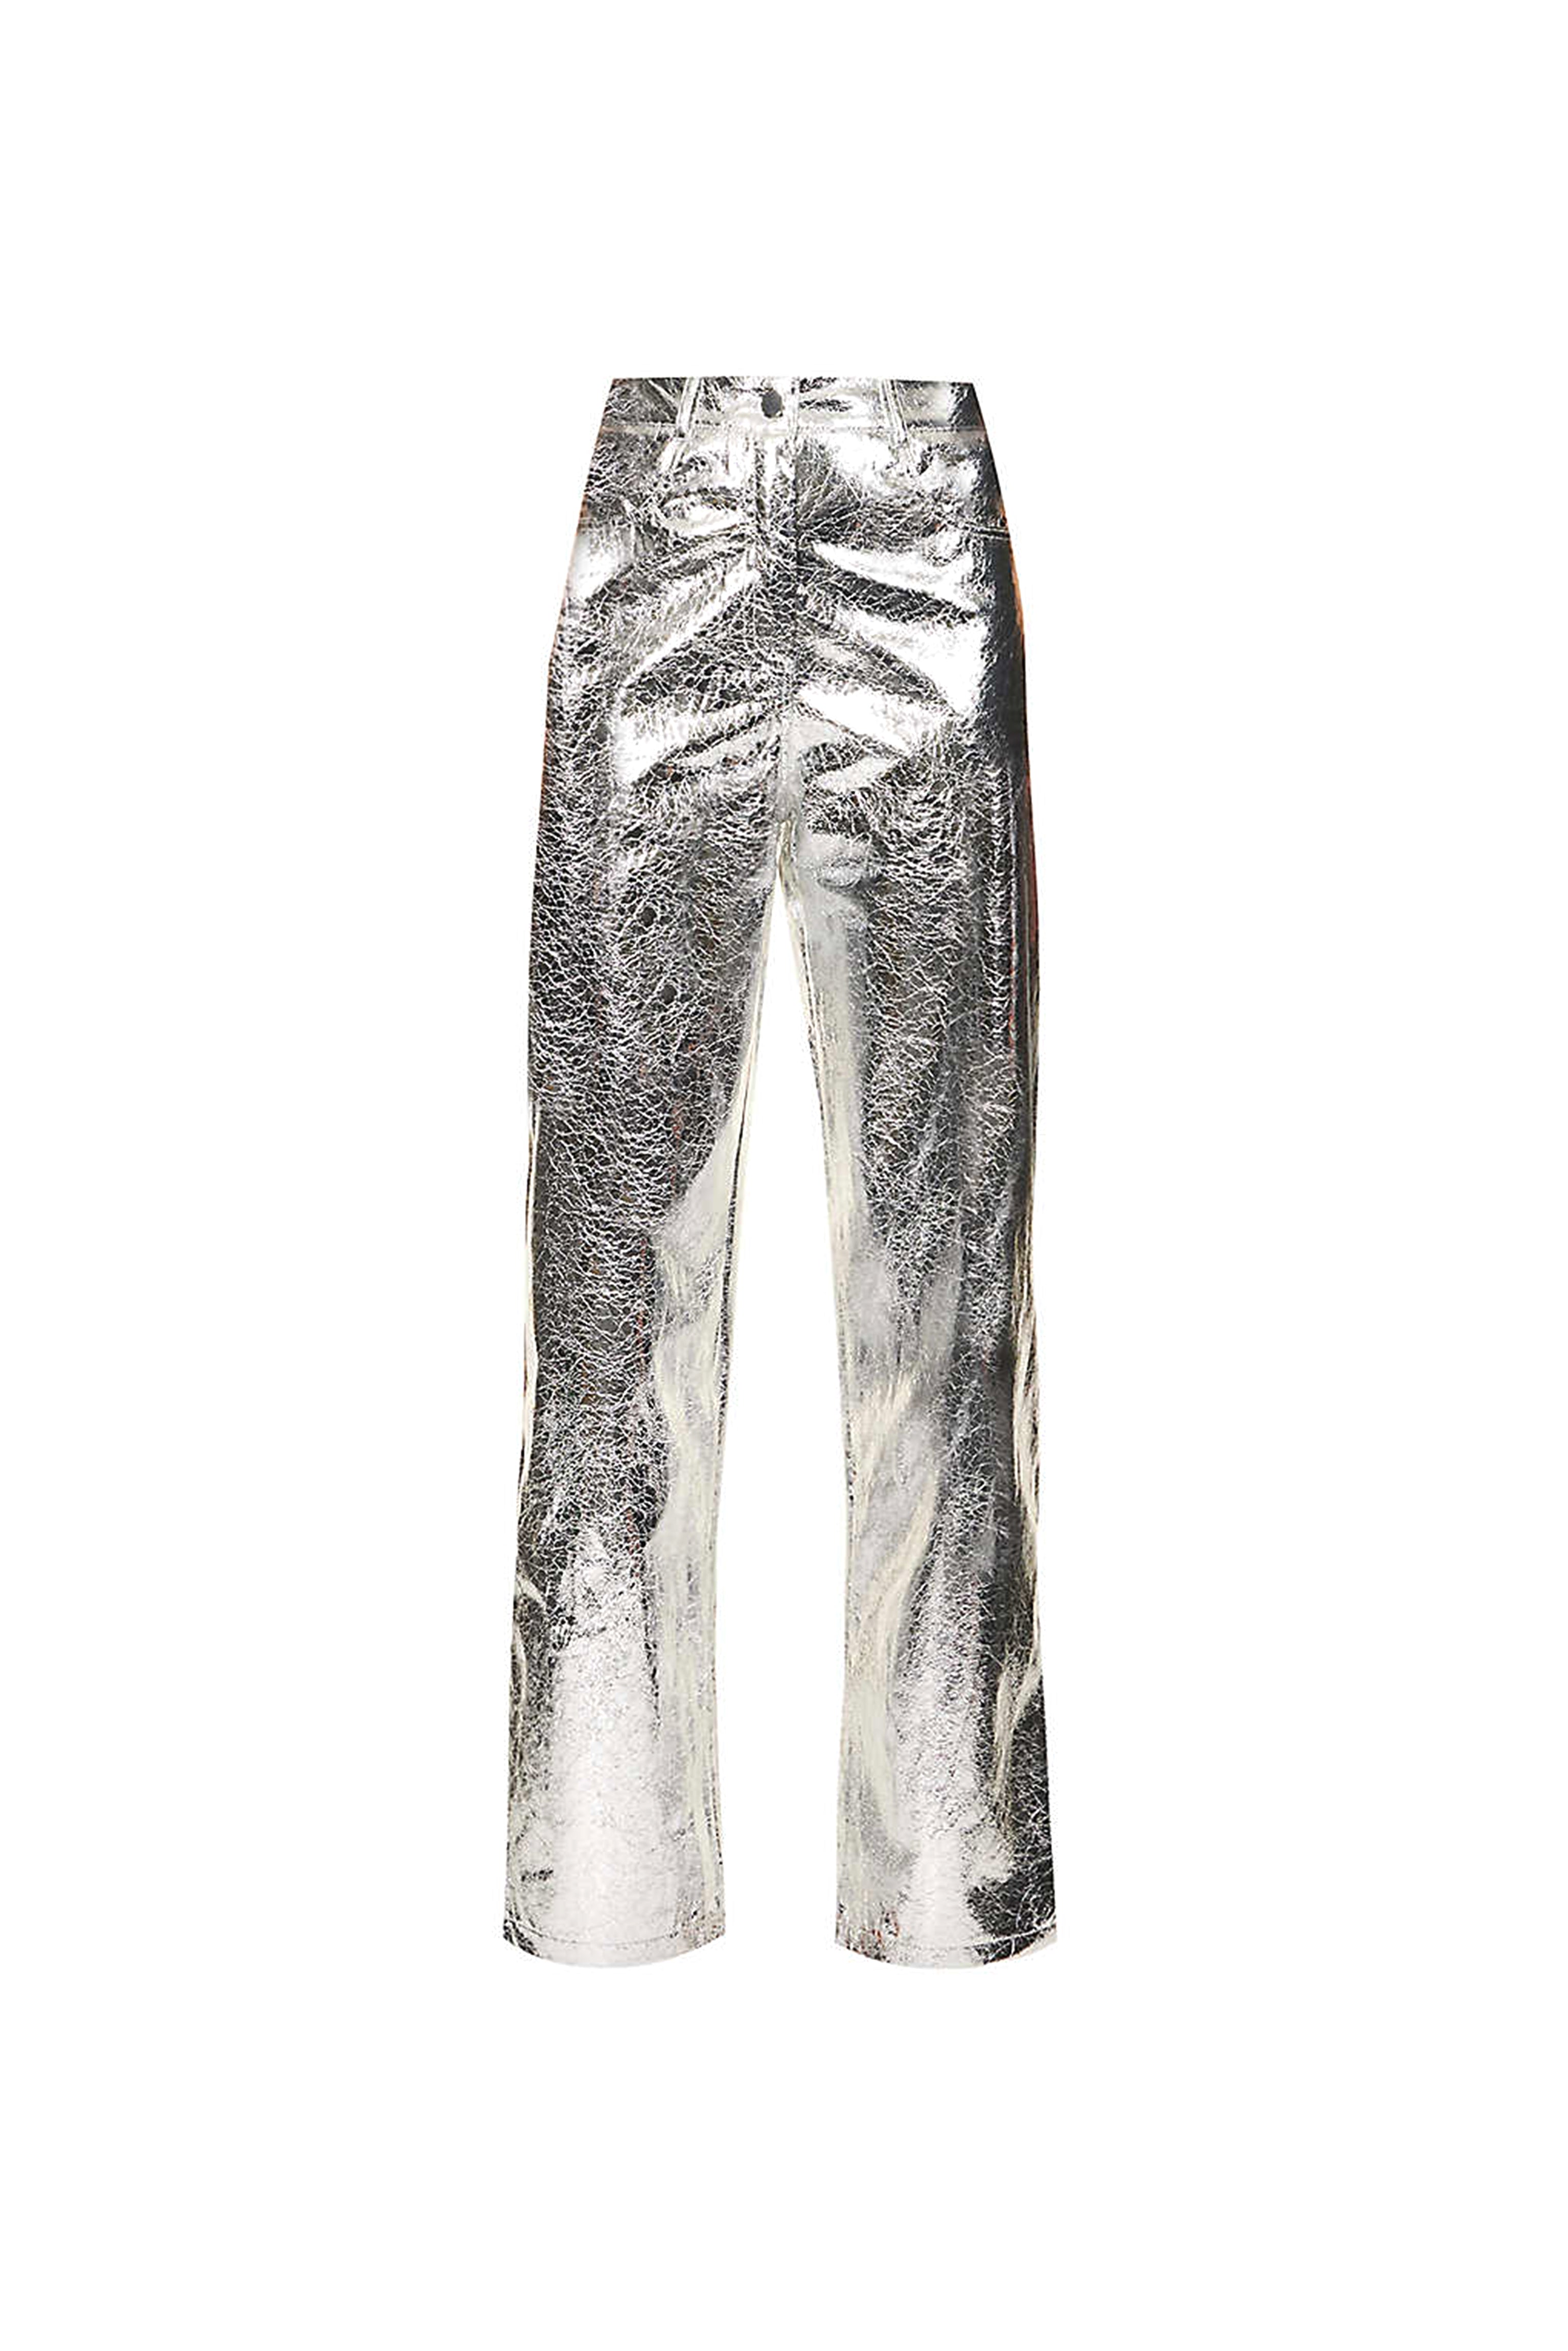 Lupe Silver Textured Metallic Trouser